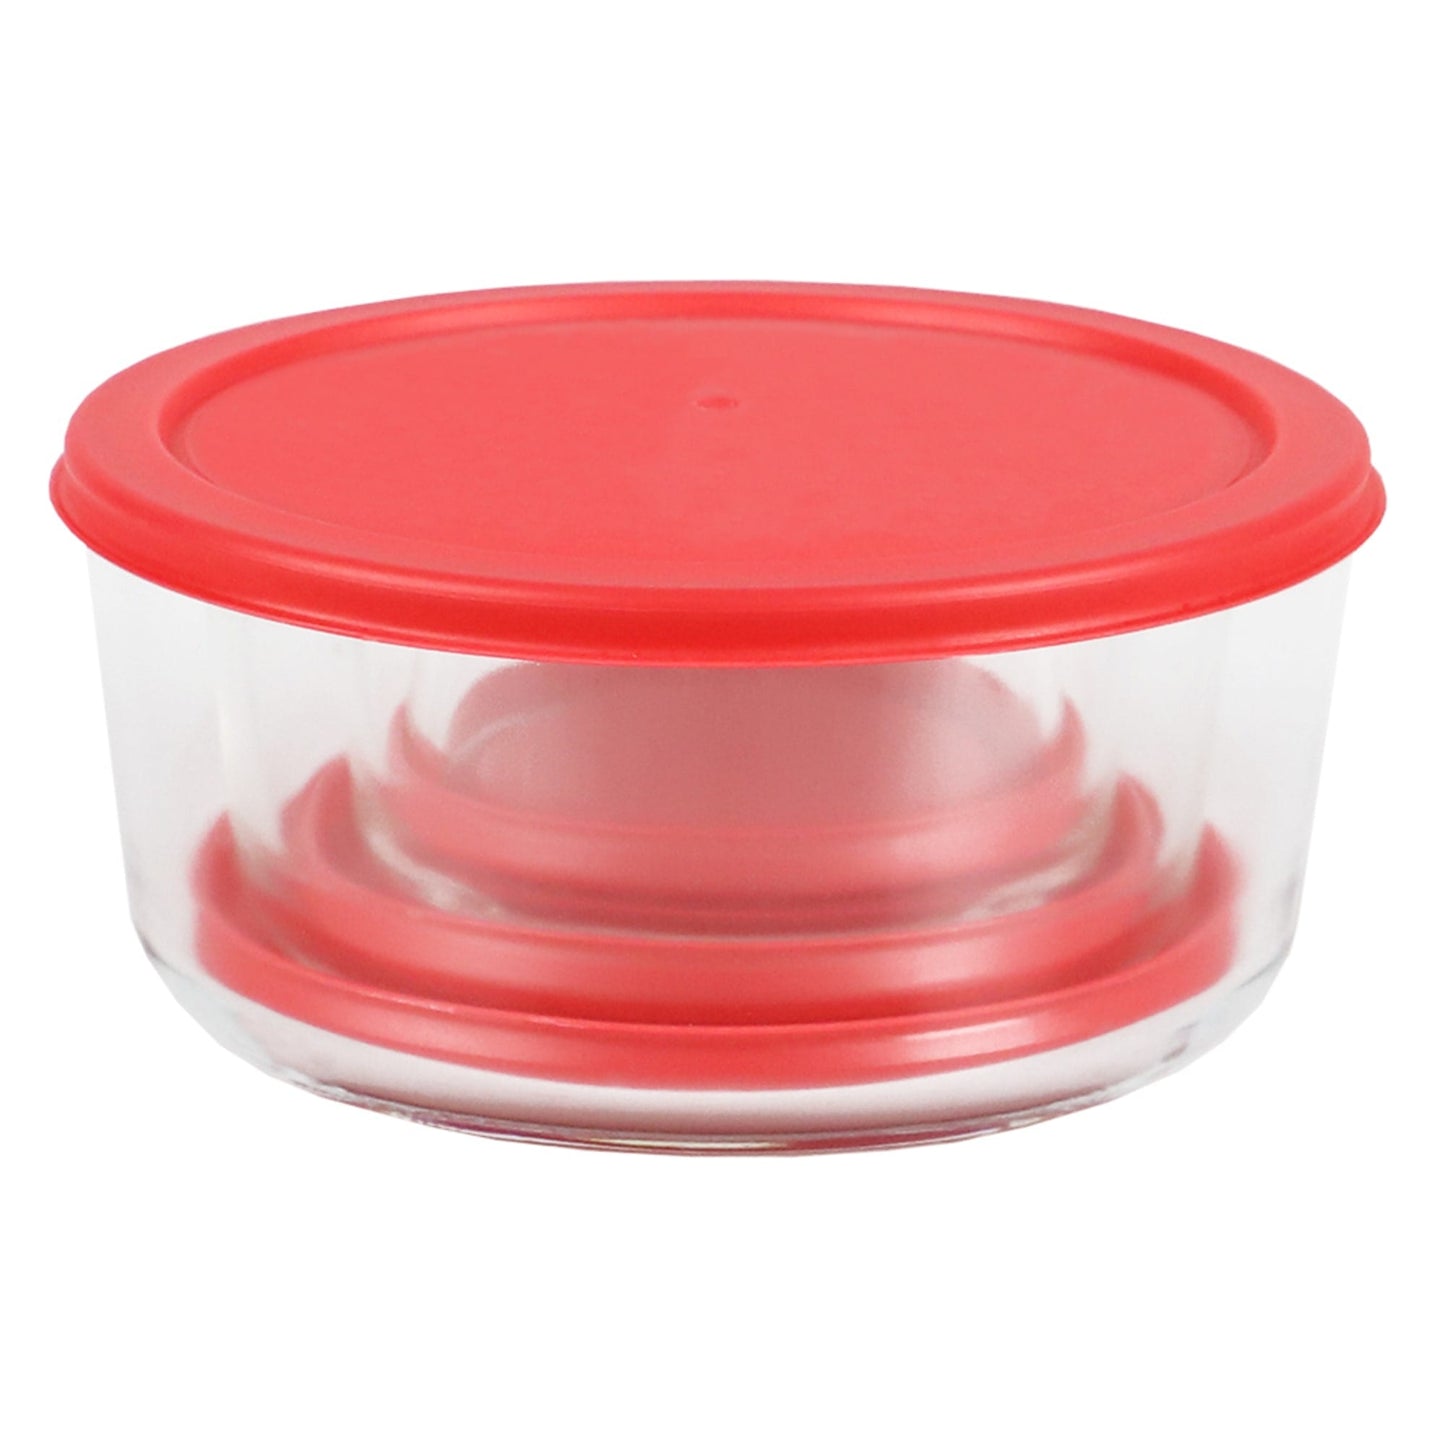 Round 8 oz. Borosilicate Glass Food Storage Container with Red Lid